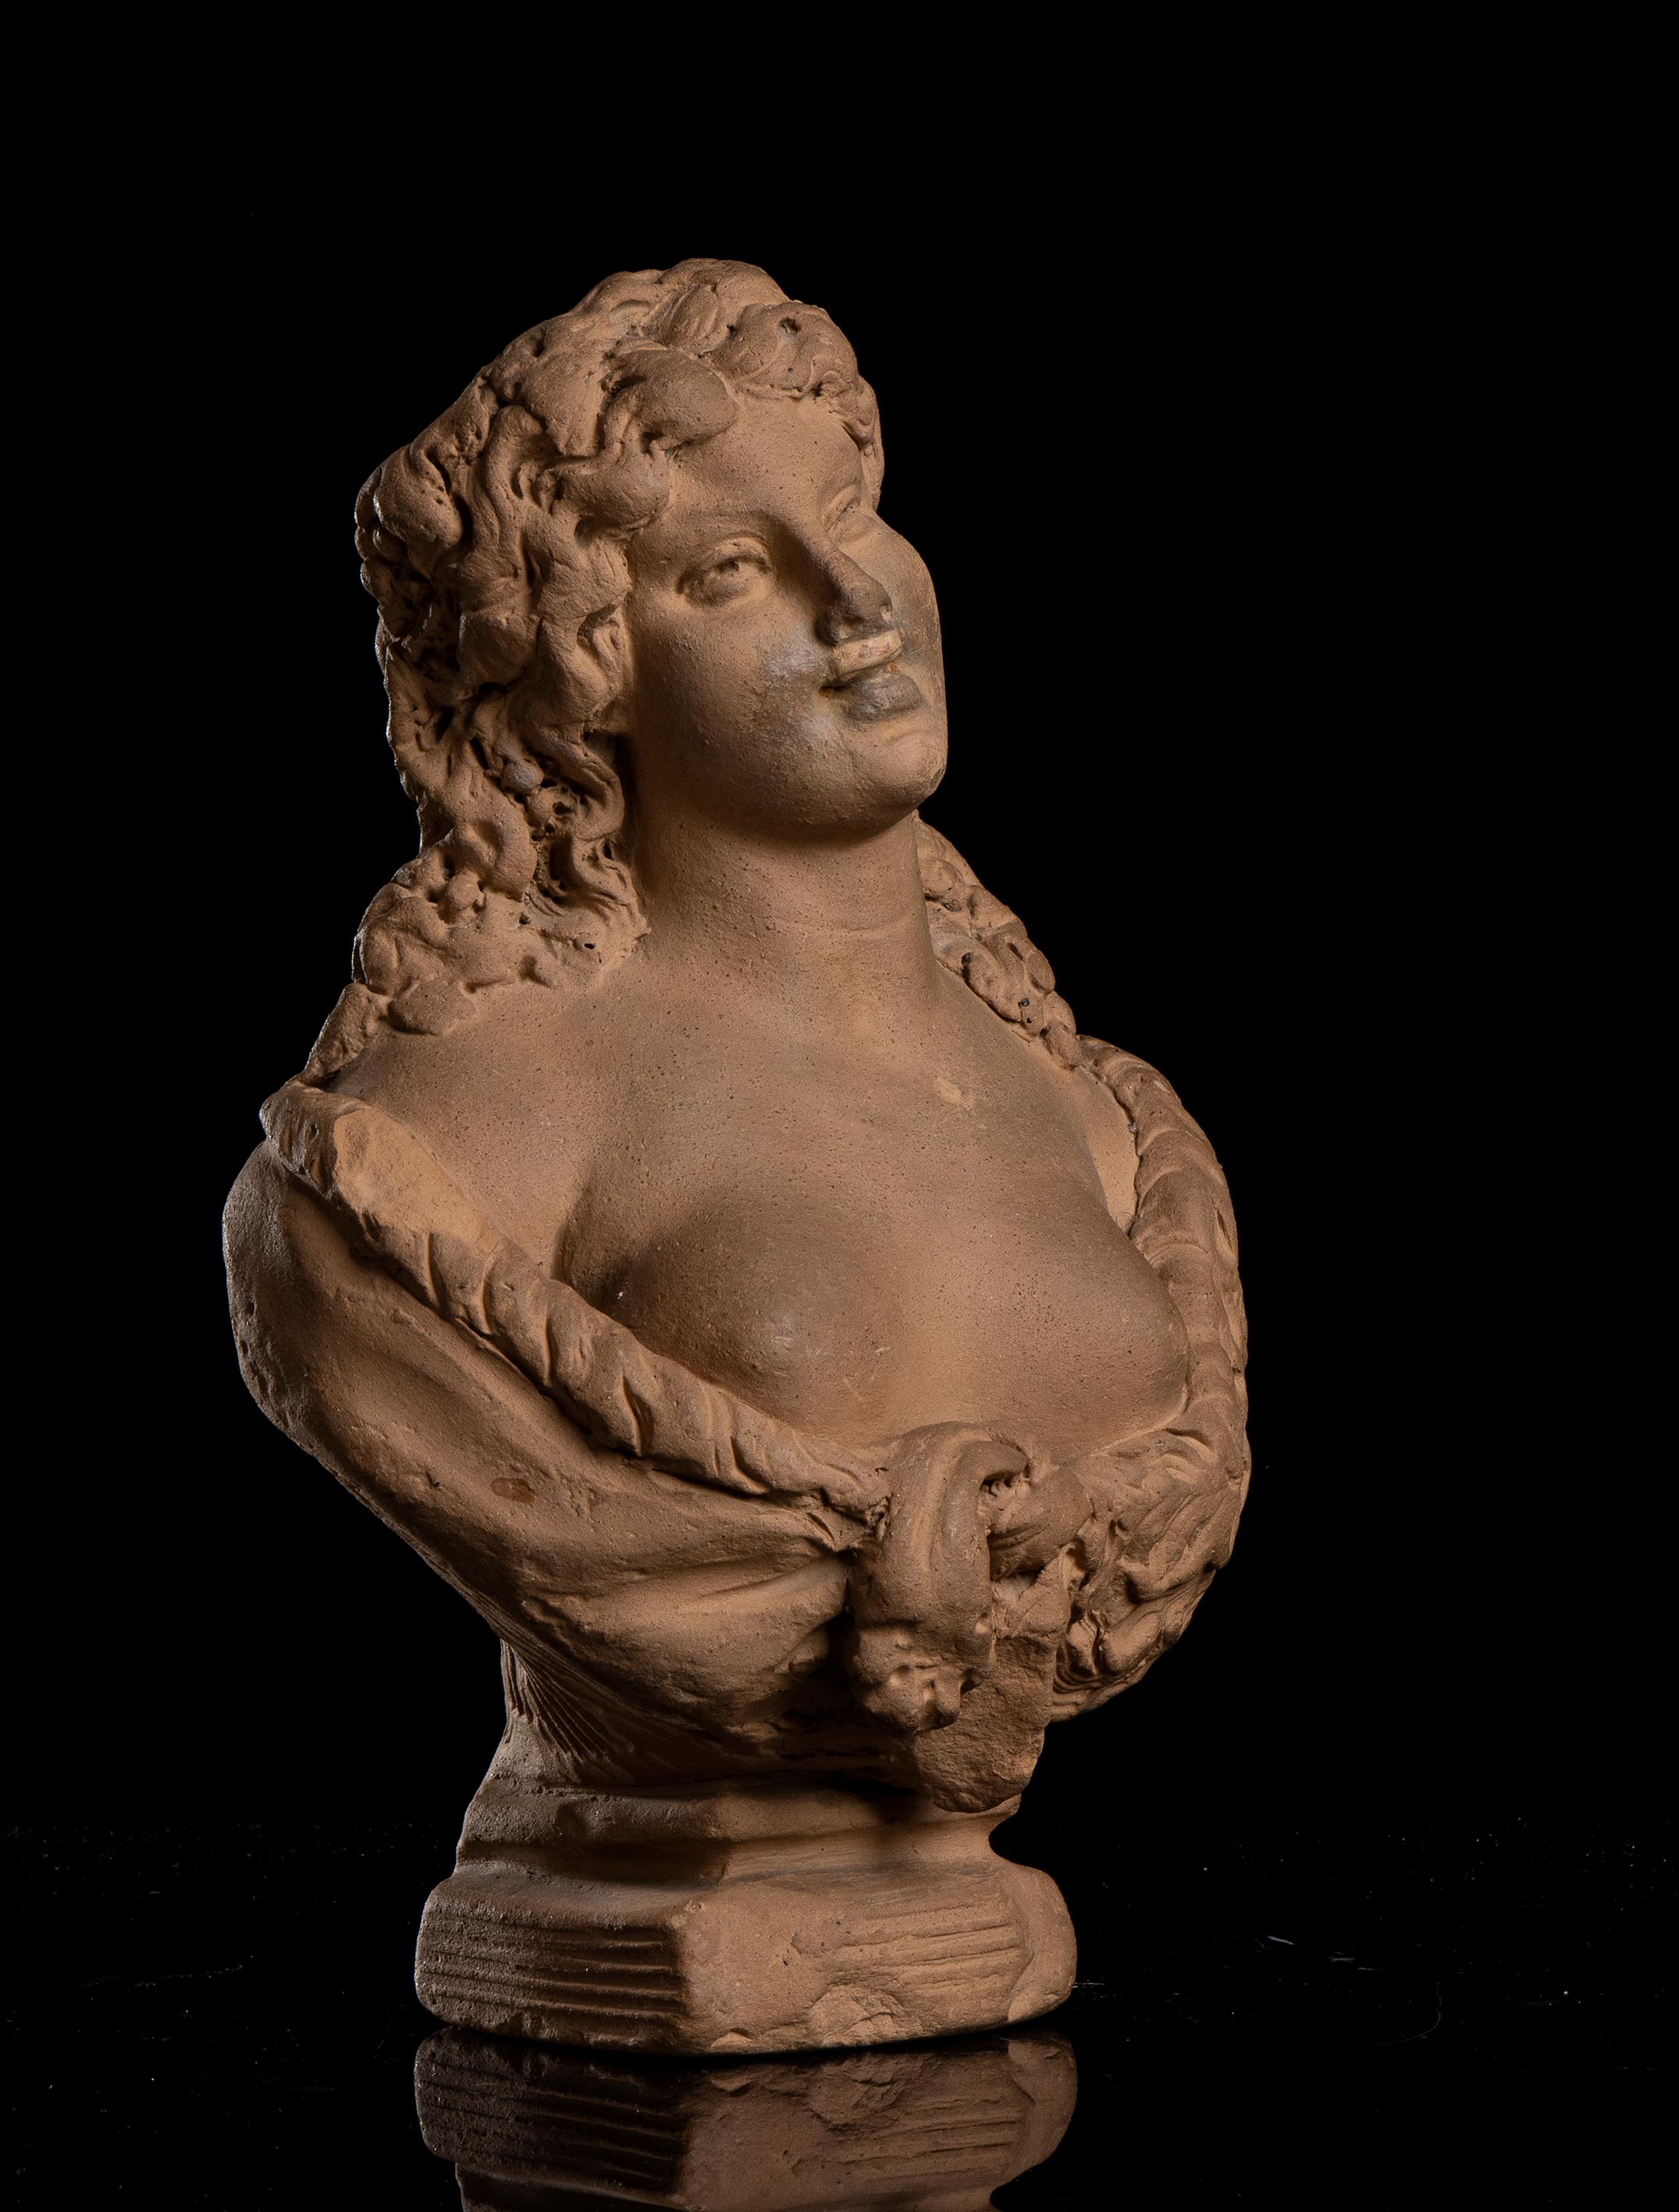 Nymph And Satyr Pair Of Sculptures Busts  By Lanzirotti Signed Terracotta 19th  17